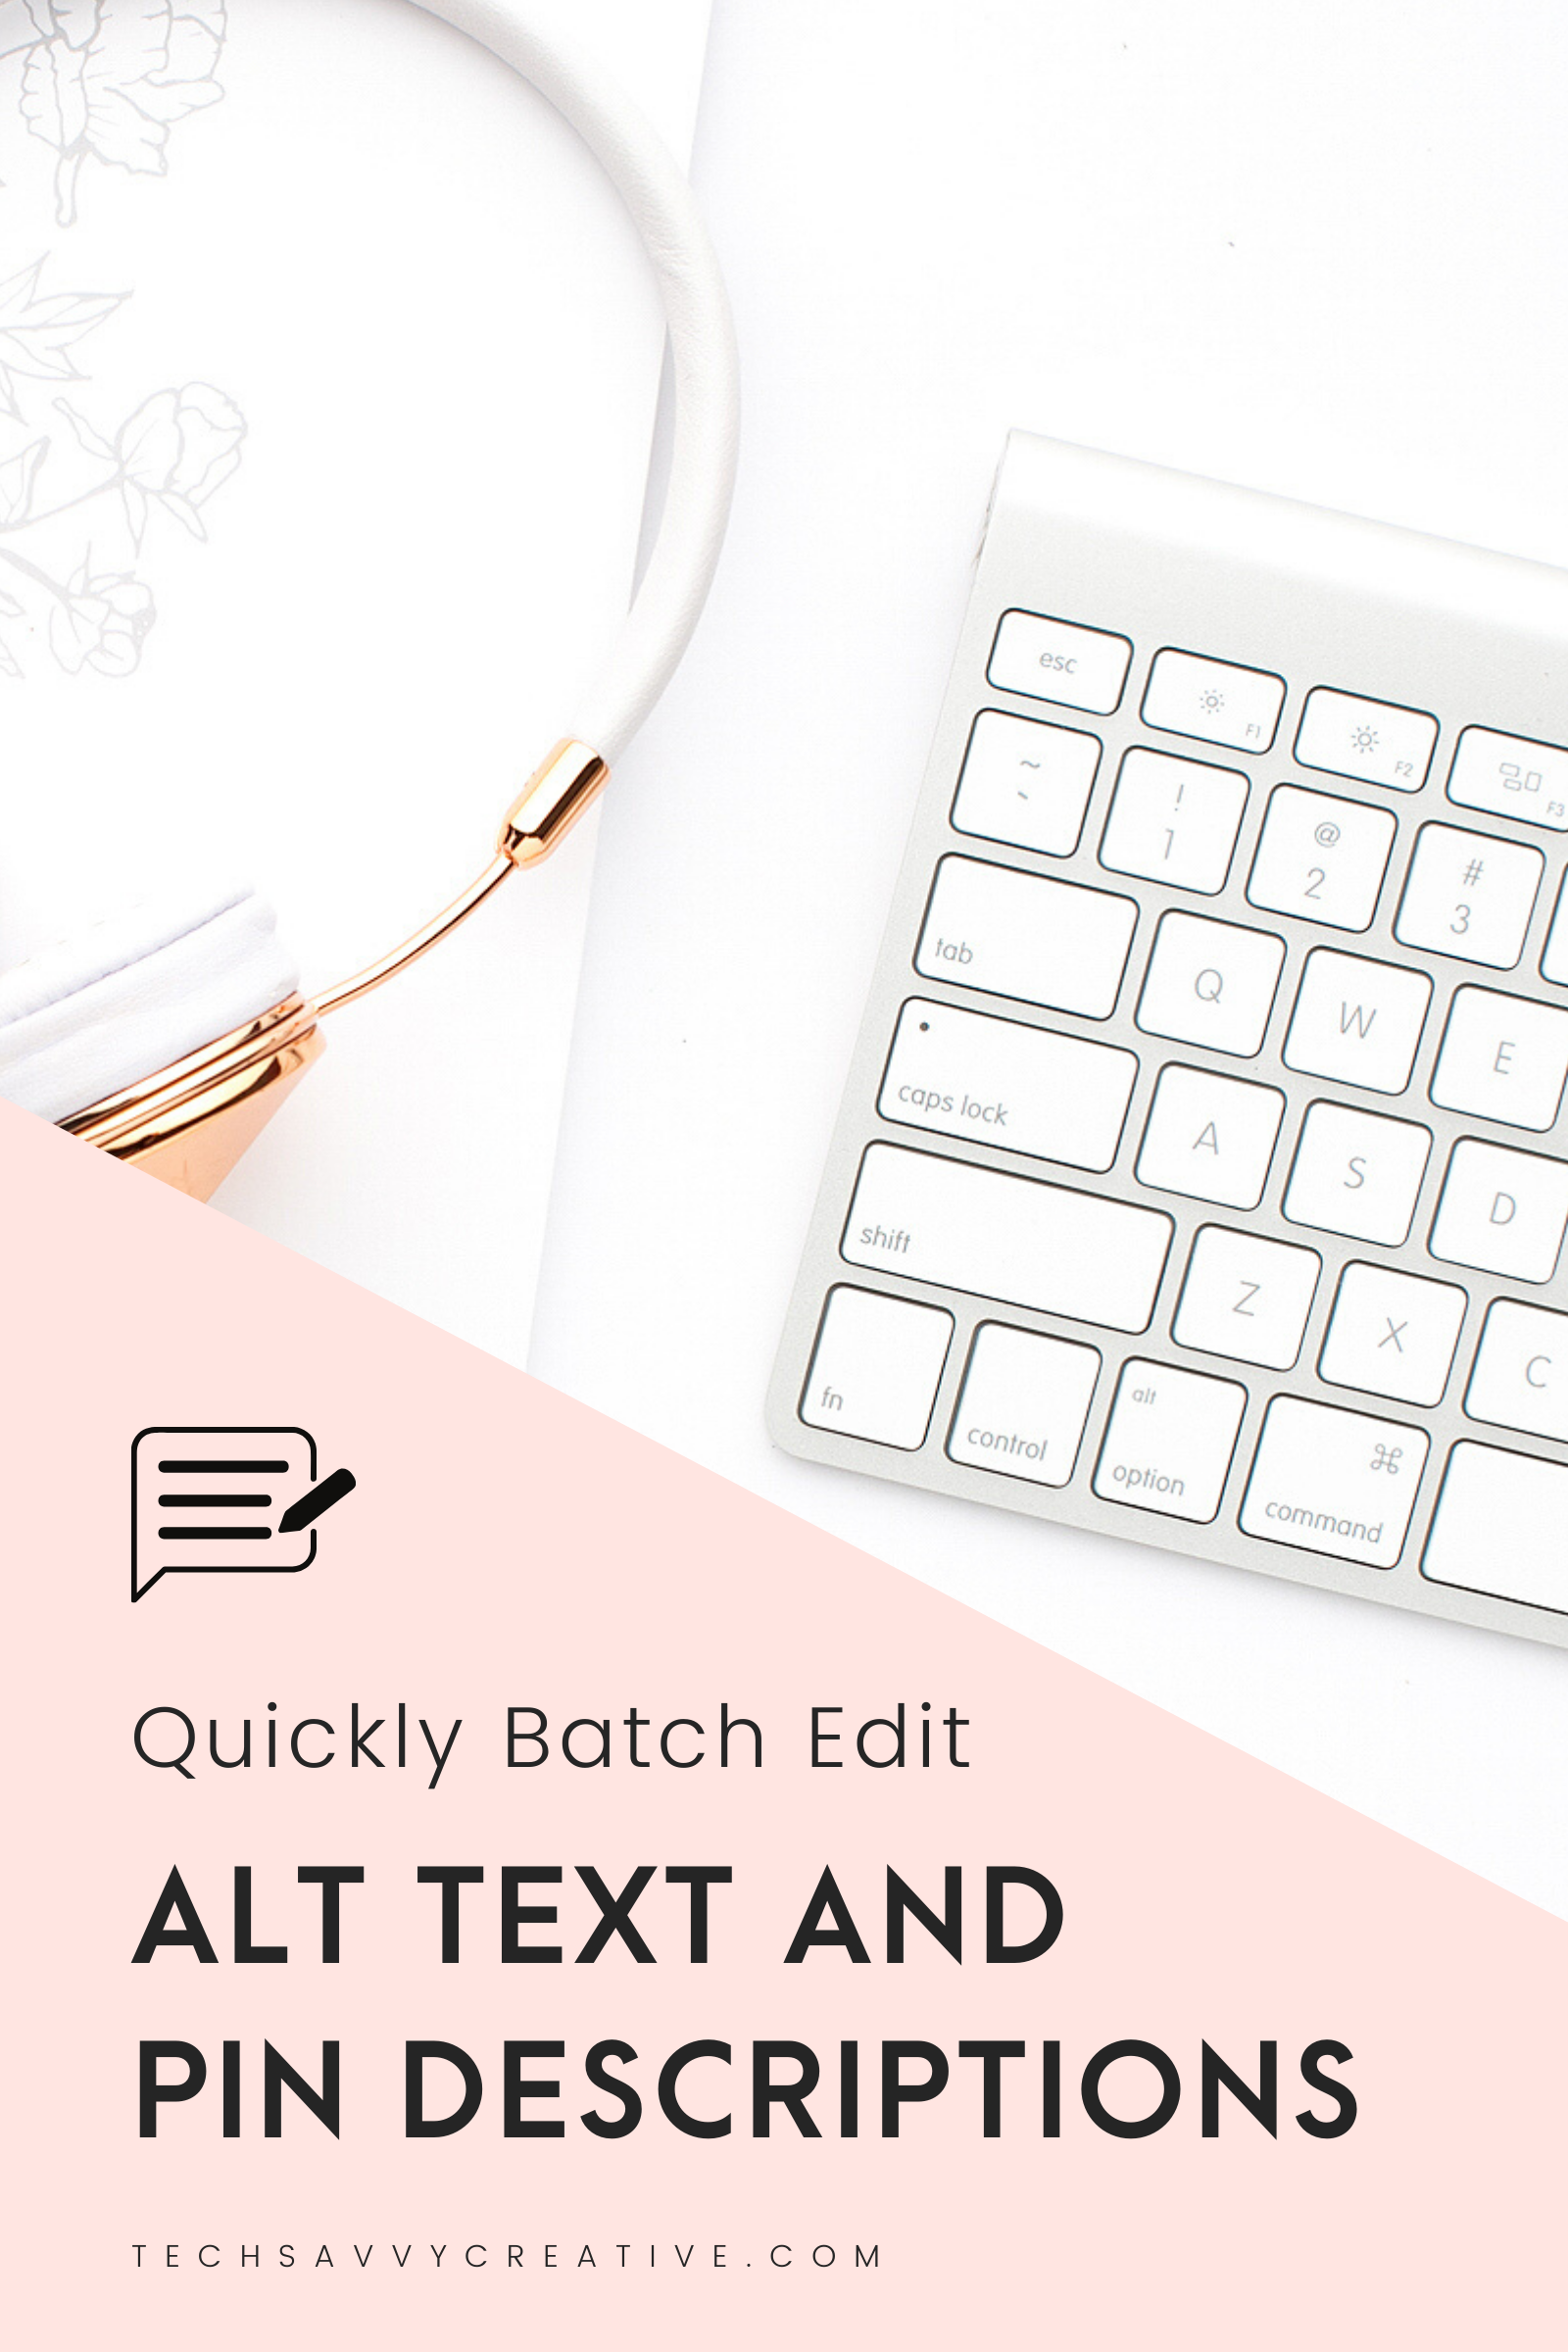 How to Batch Edit Alt Text and Pin Description with Tech Savvy Creative